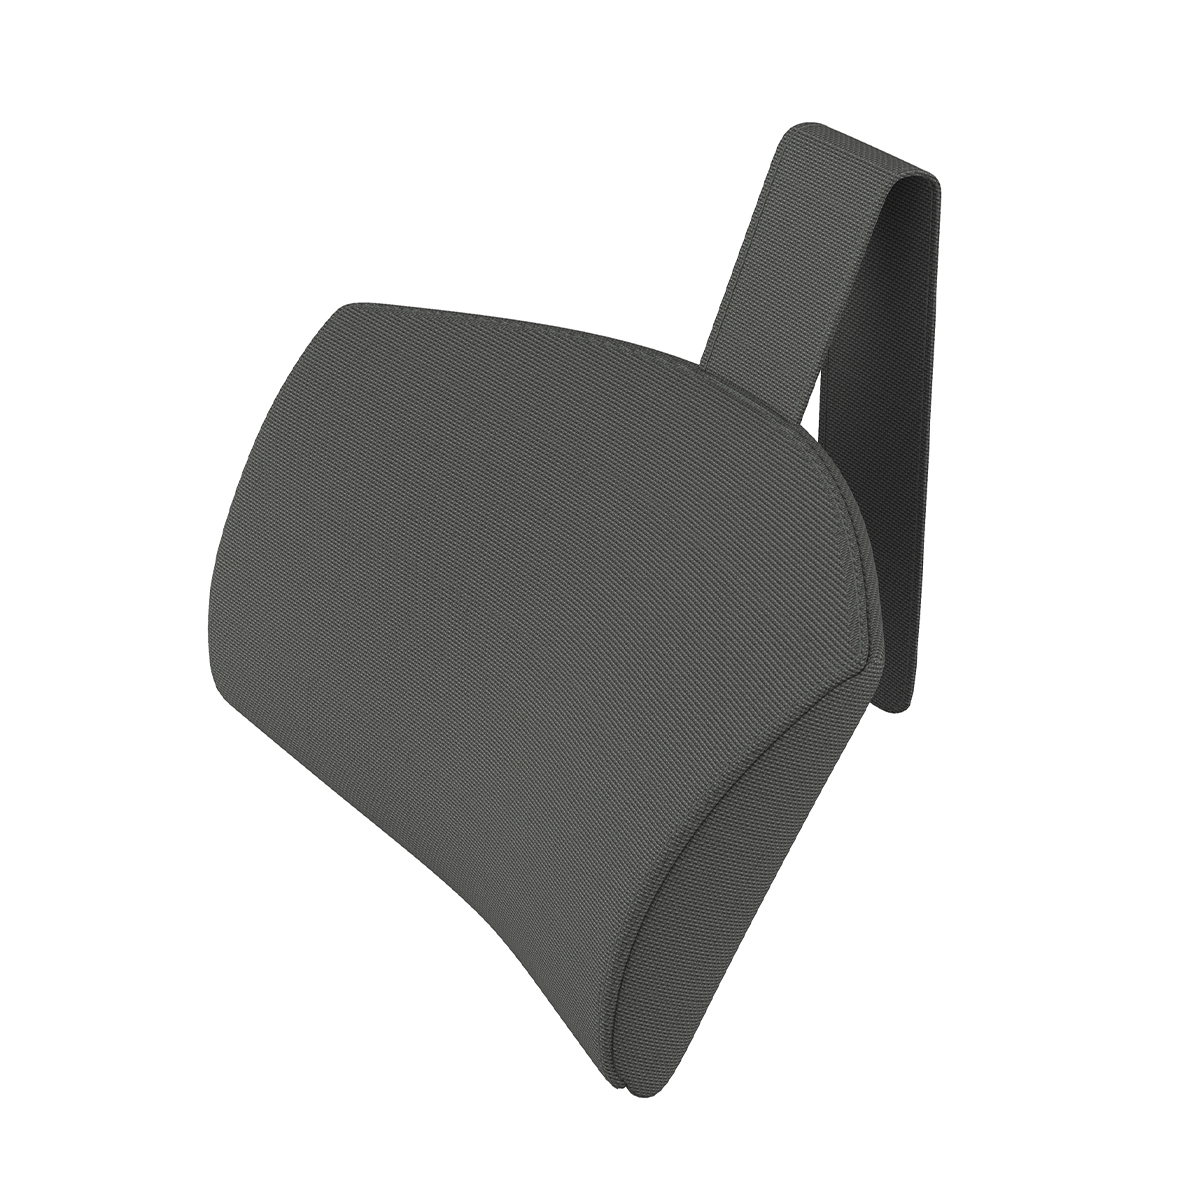 Victoria + Albert Universal headrest in anthracite. Suitable for most V+A baths. Distributed in Australia by Luxe by Design, Brisbane.